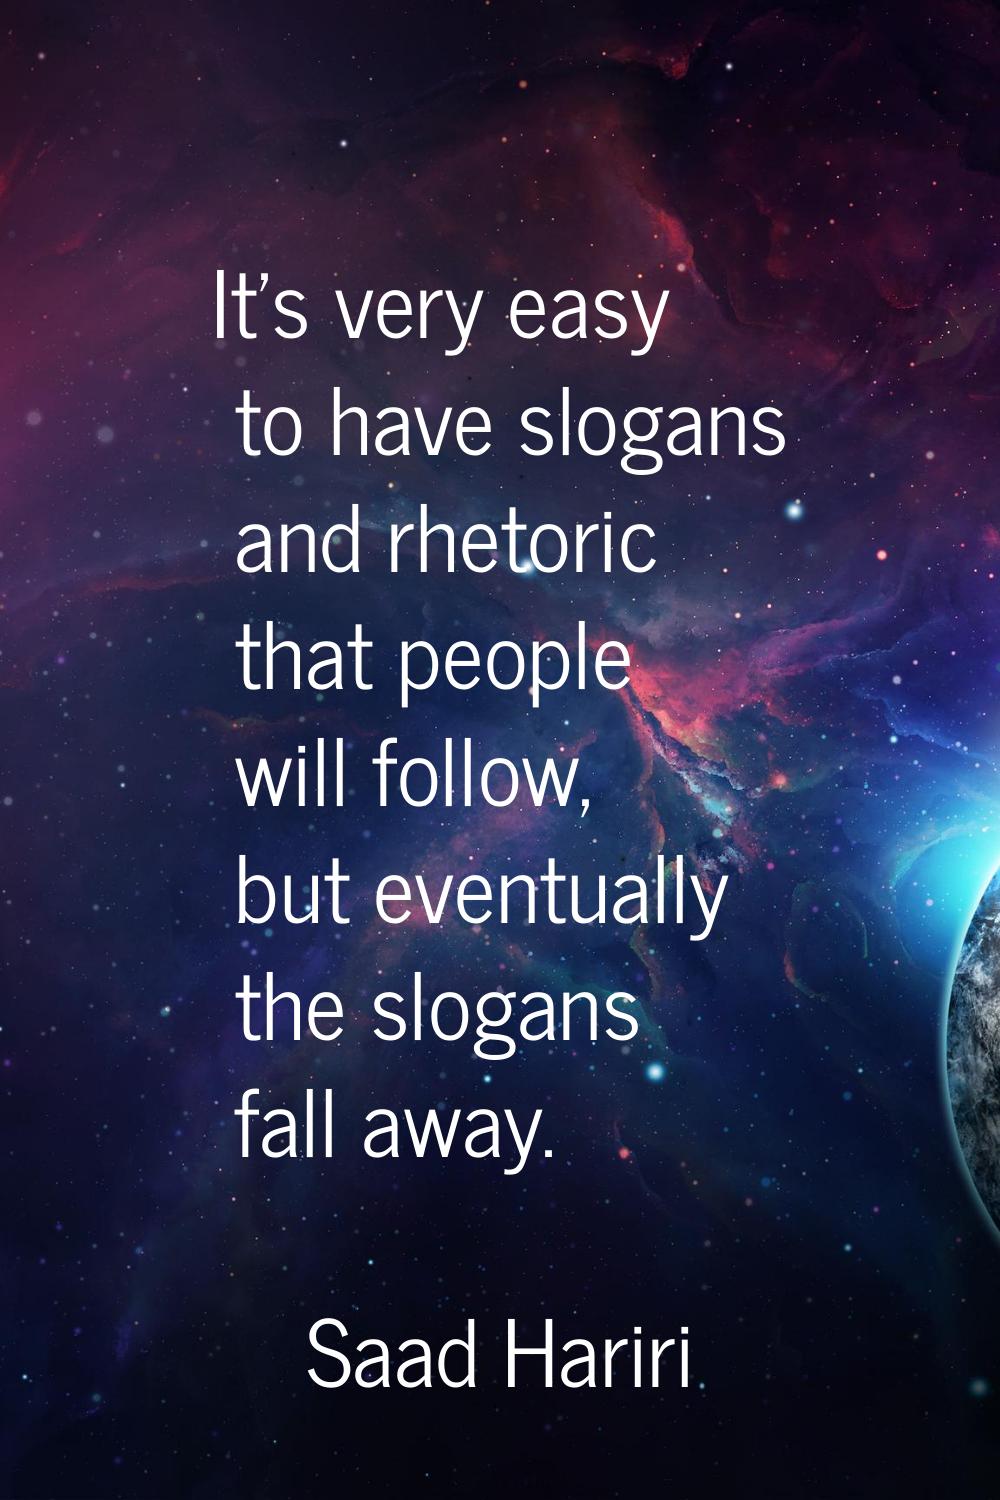 It's very easy to have slogans and rhetoric that people will follow, but eventually the slogans fal